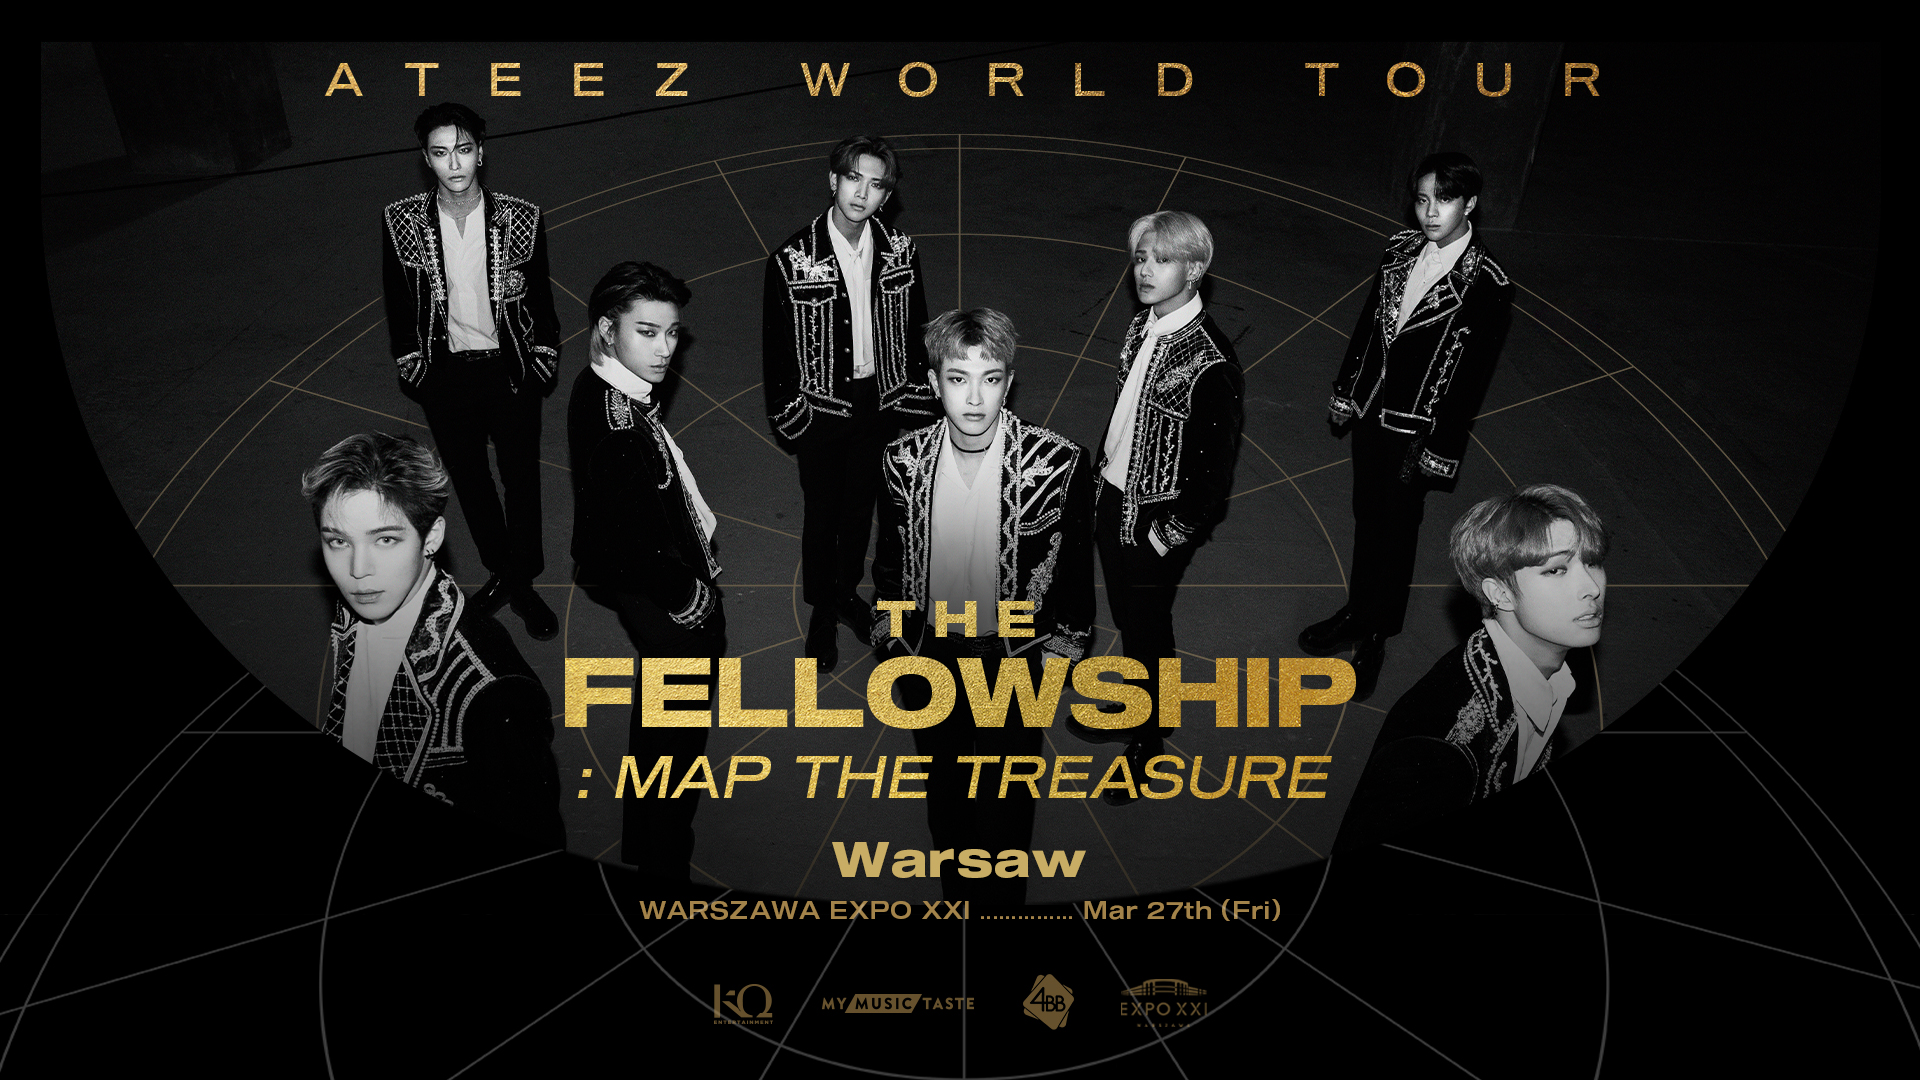 Ateez World Tour – cancelled – WITH MY MUSIC TASTE